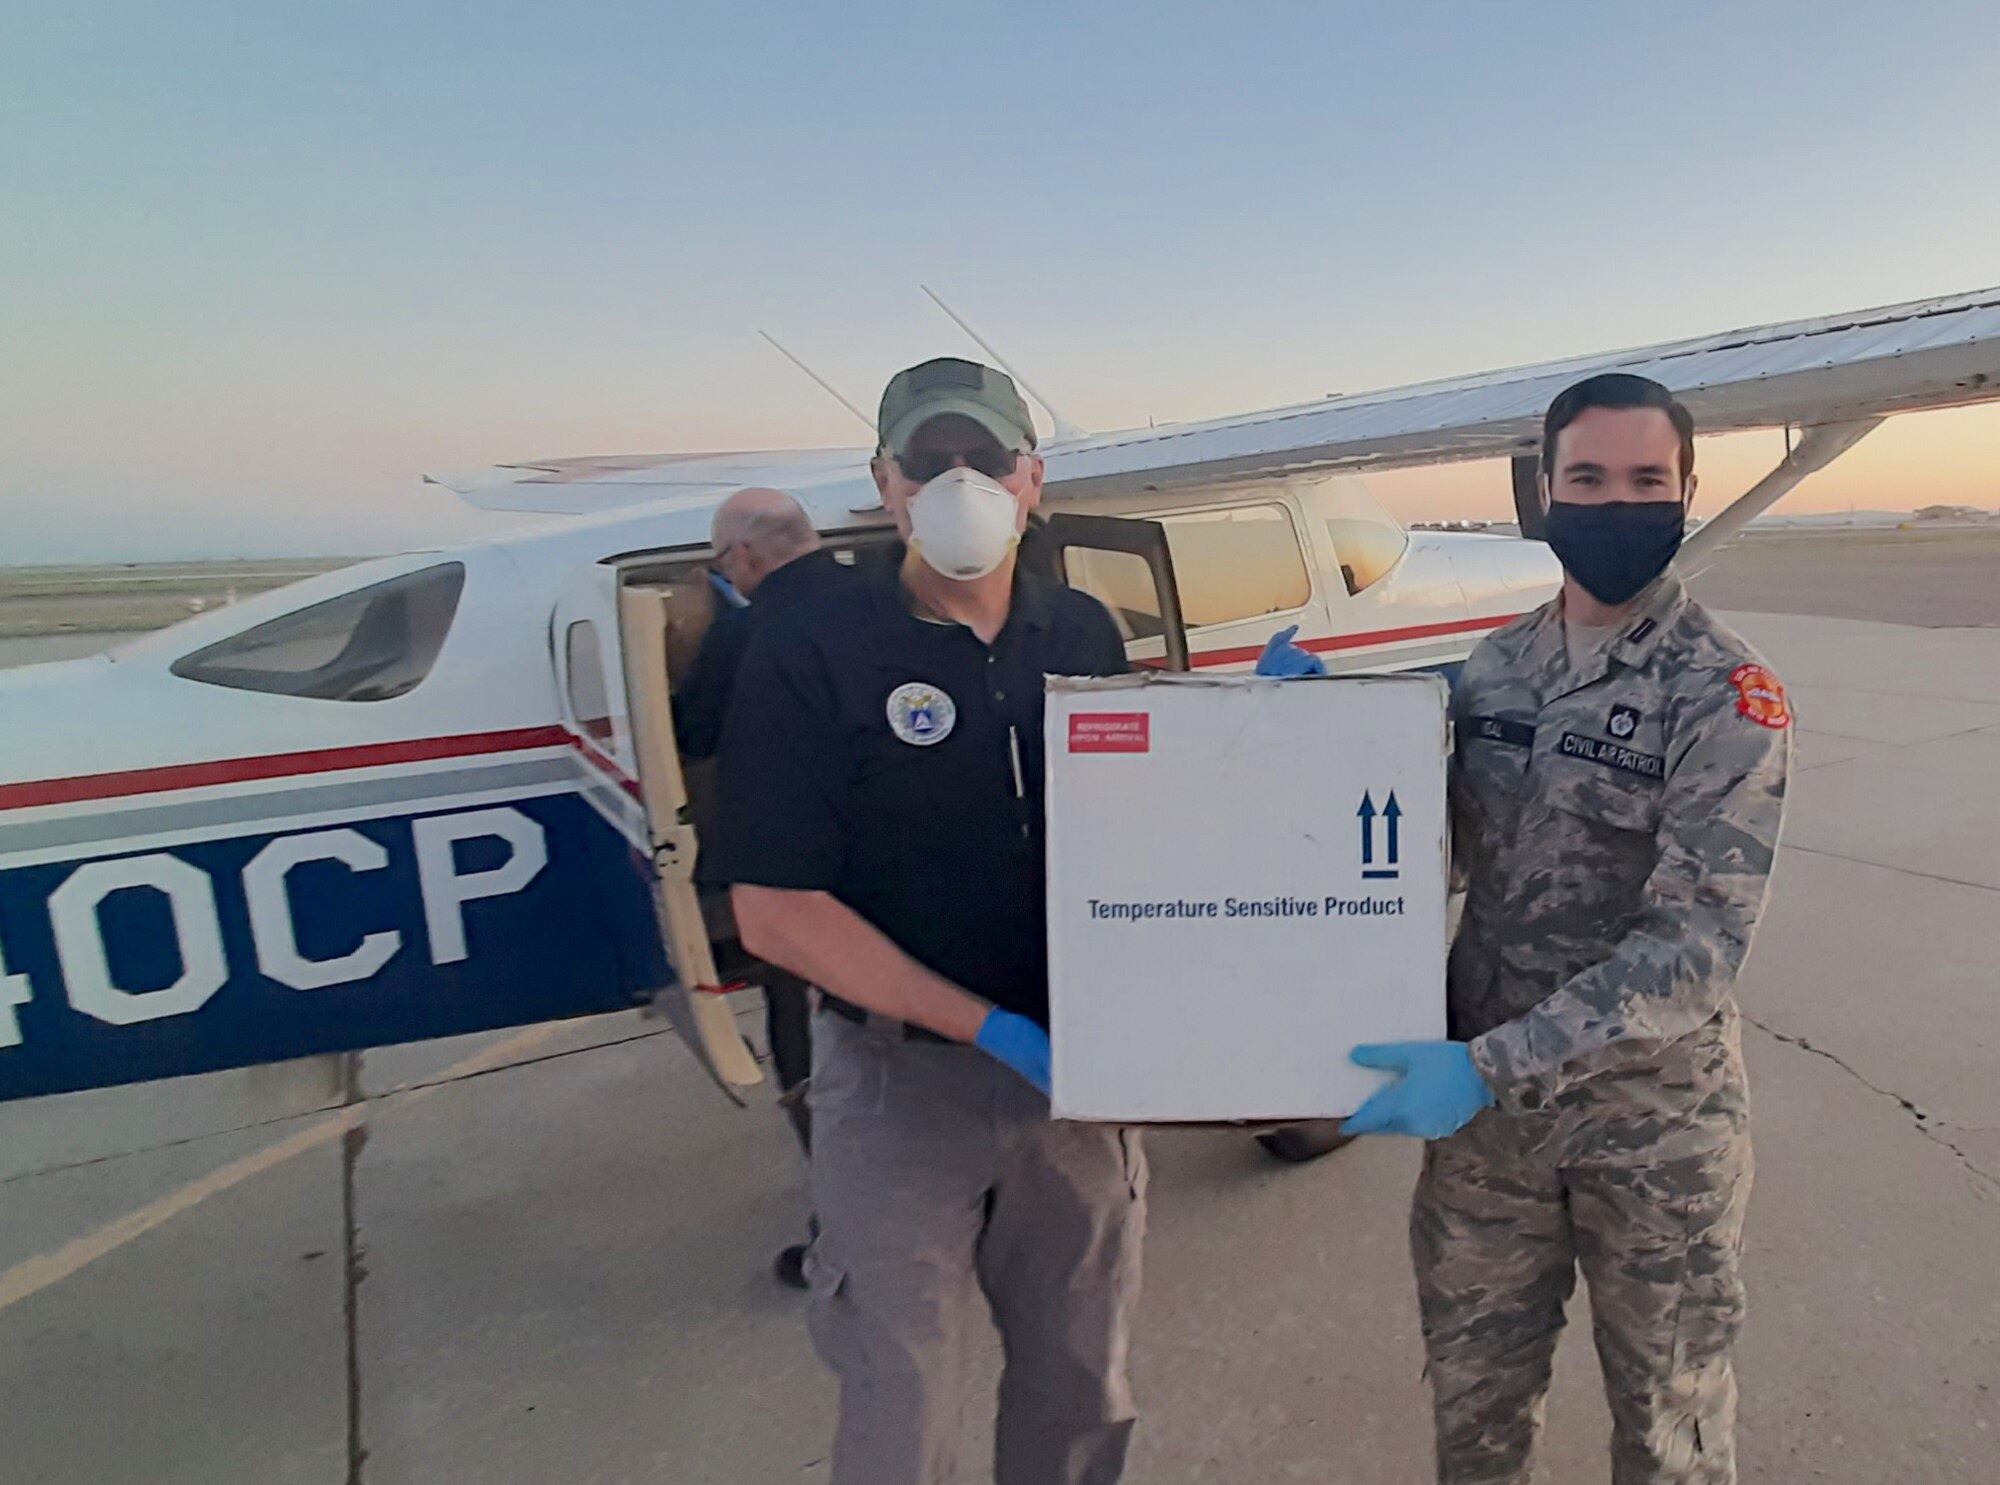 New Mexico Civil Air Patrol Maj. Gregory Griffith, left, and Flight Officer Casey Neal carry a package of COVID-19 test kits from the CAP aircraft to a vehicle for transport from Albuquerque International Airport to a laboratory for processing.